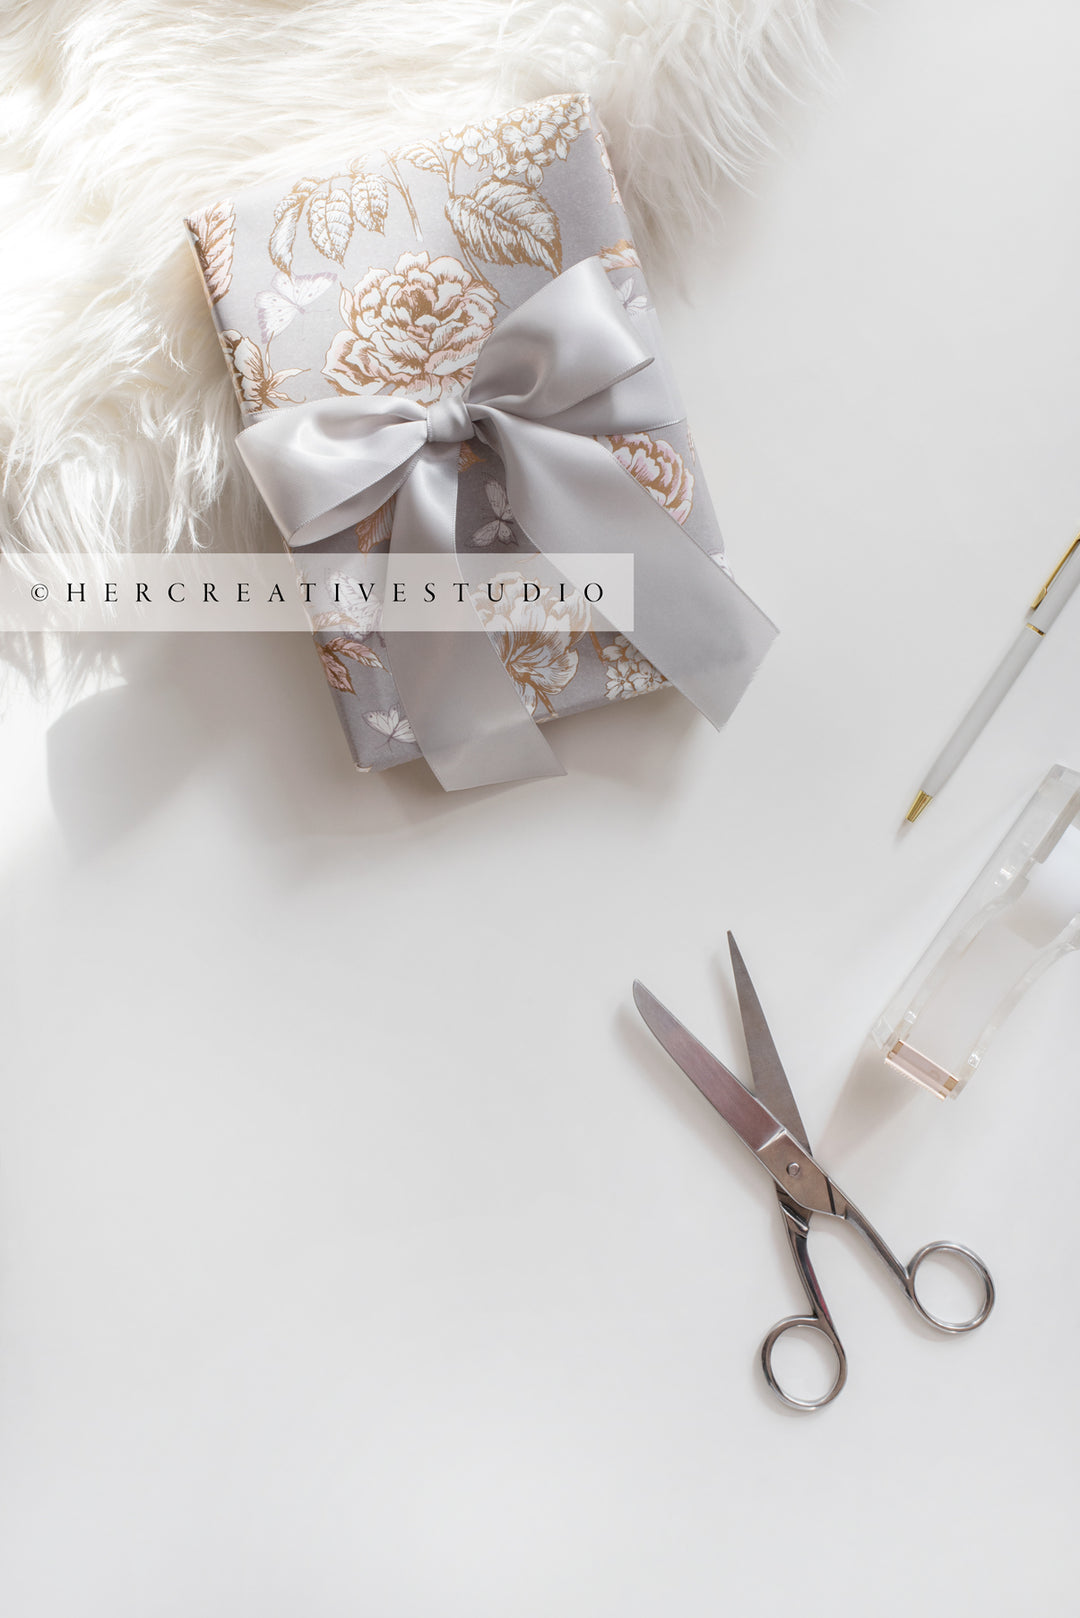 Grey Gift with Ribbon & Scissors in Sunlight, Stock Image